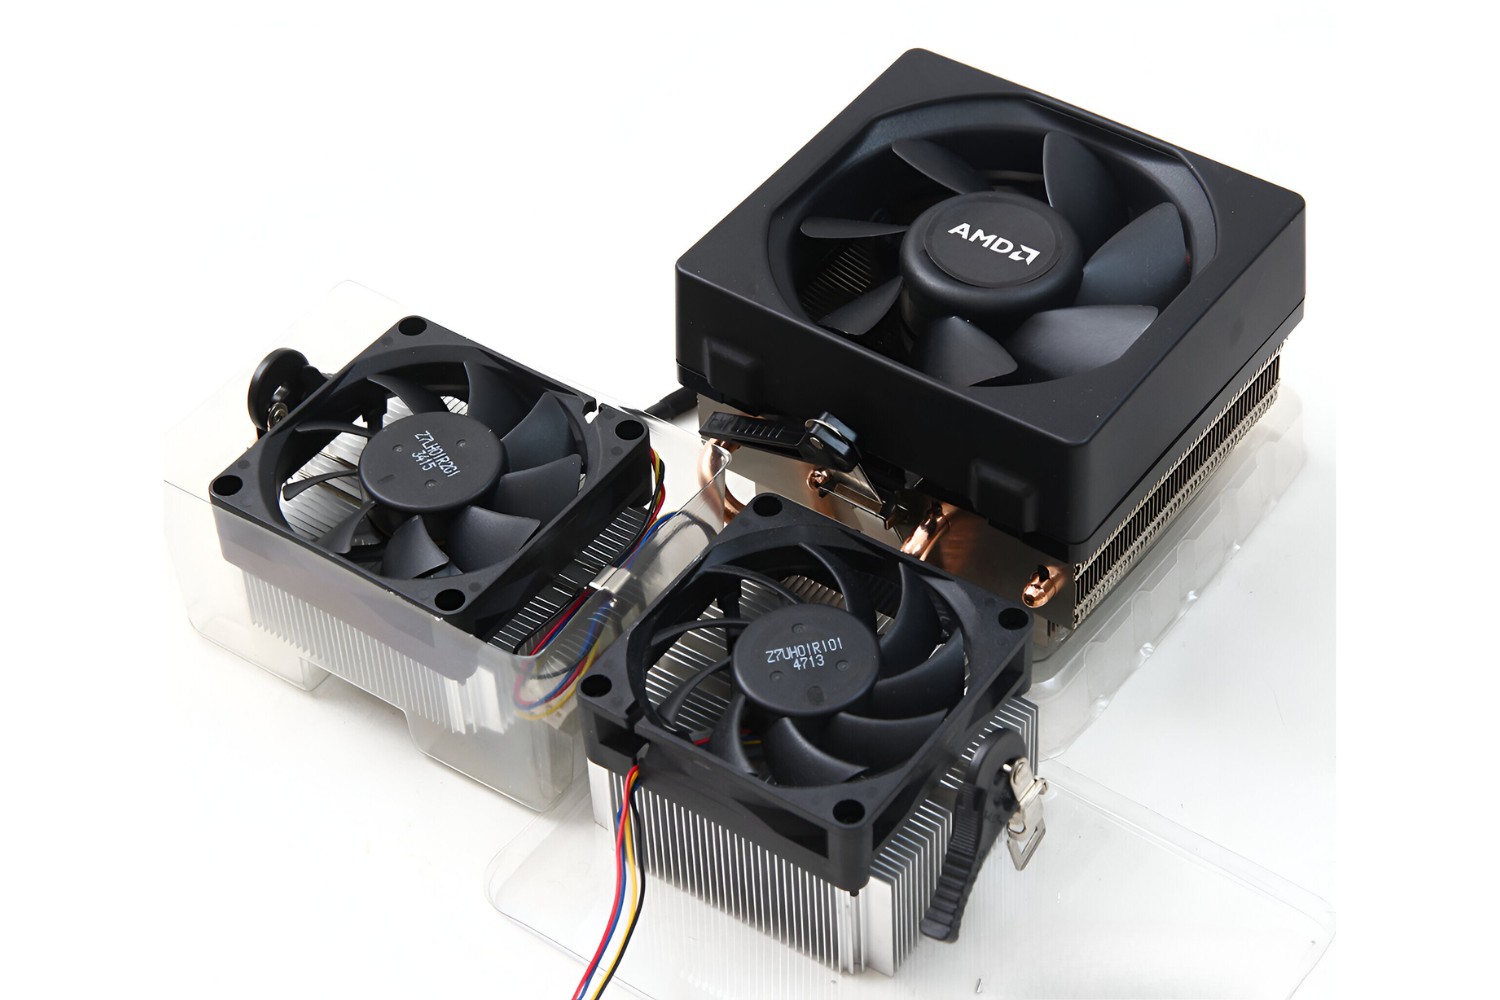 What CPU Cooler Should I Get For The AMD FX9590